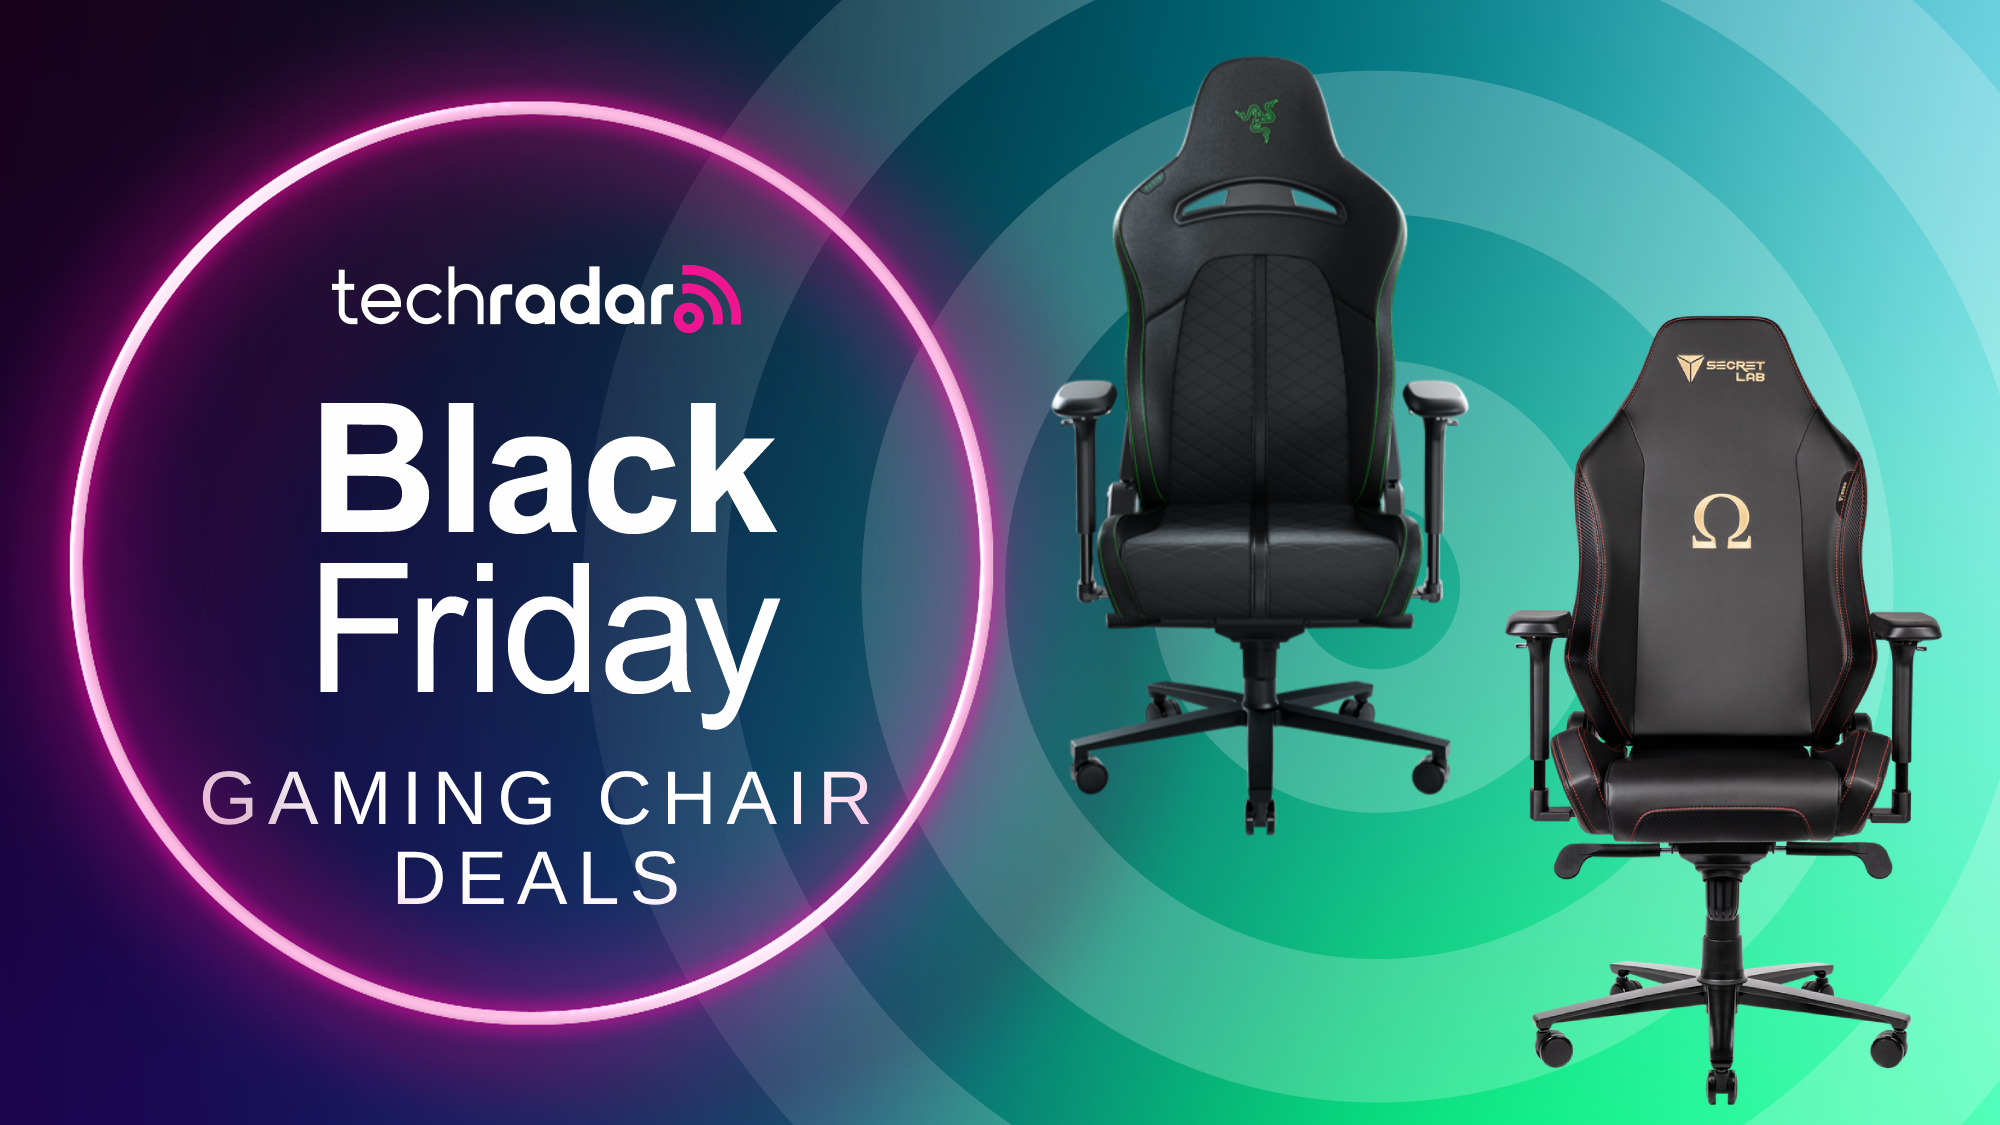 Secretlab Offers Gaming Chair Discounts With Spring Sale